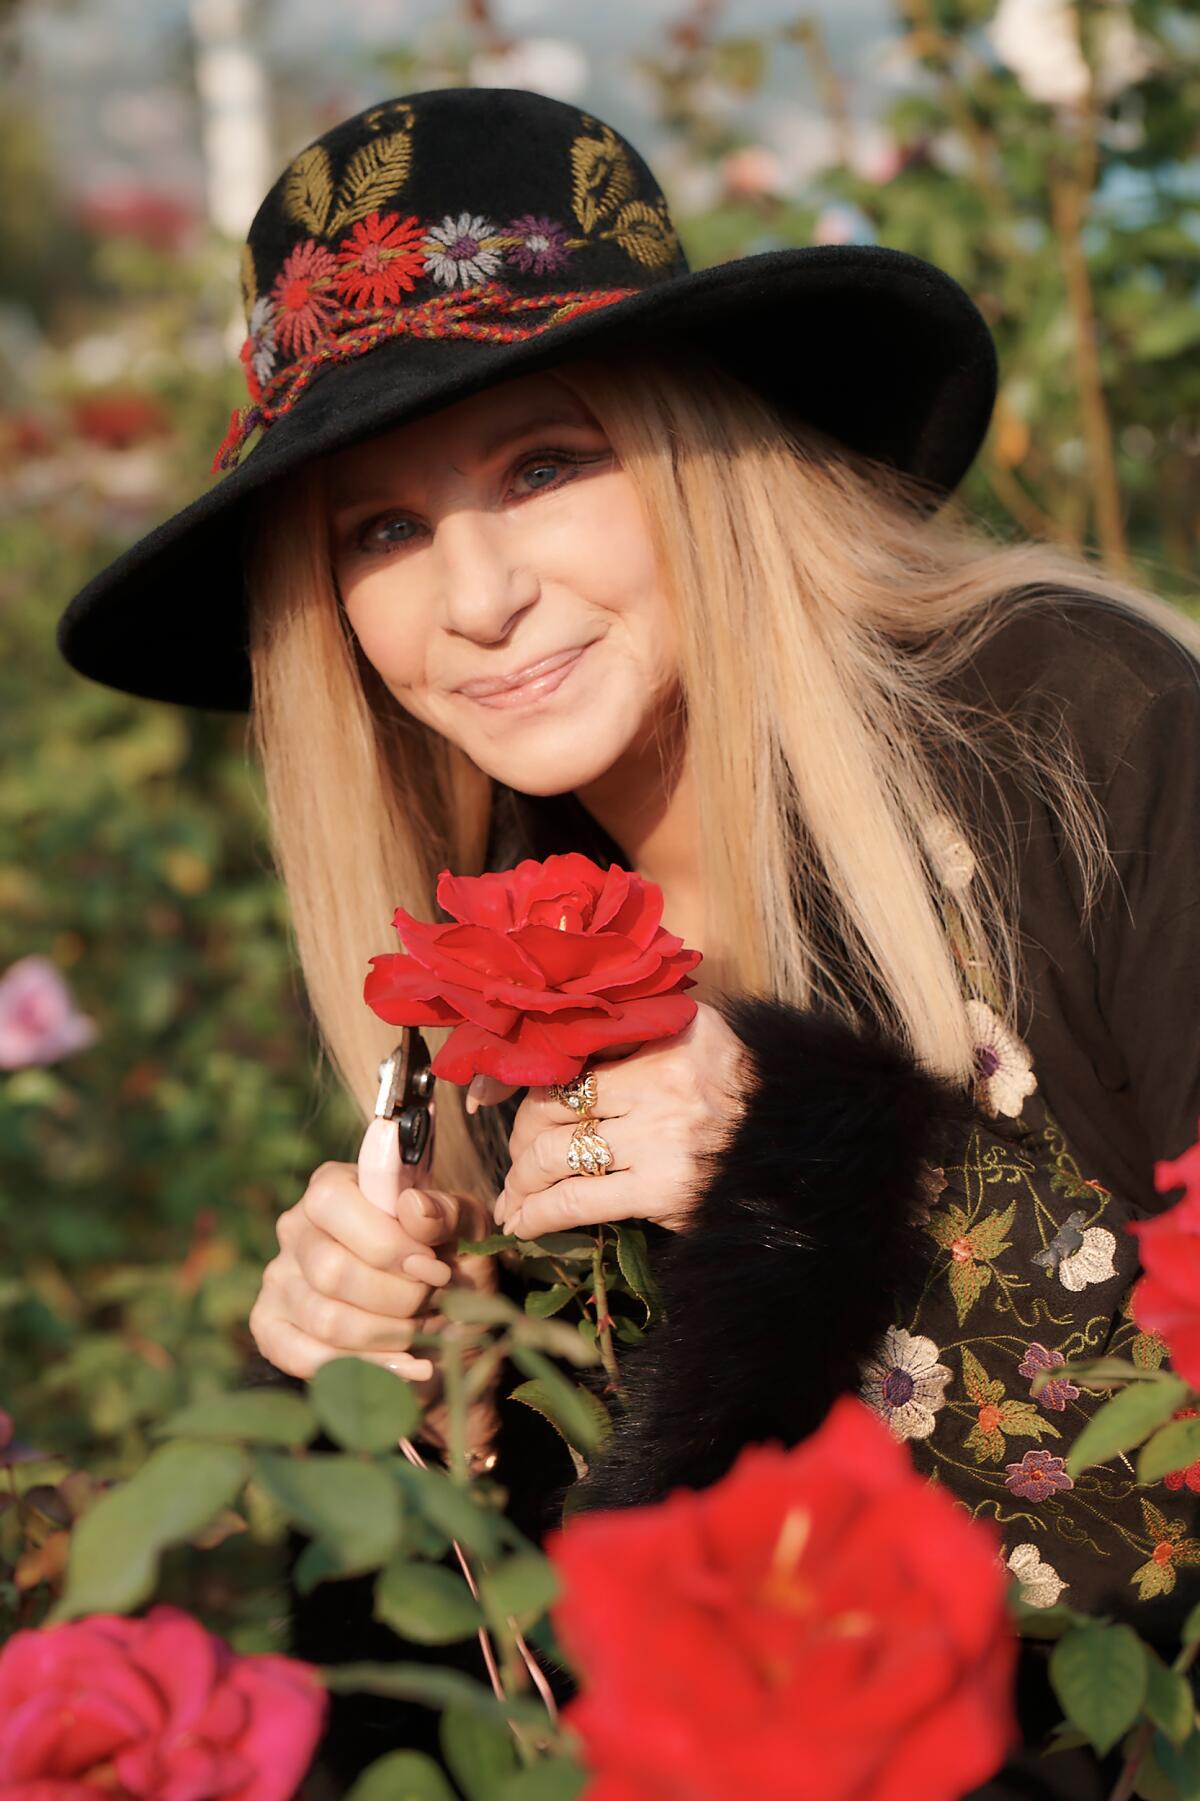 Barbra Streisand wears a floppy black hat and holds a colorful rose in a portrait.